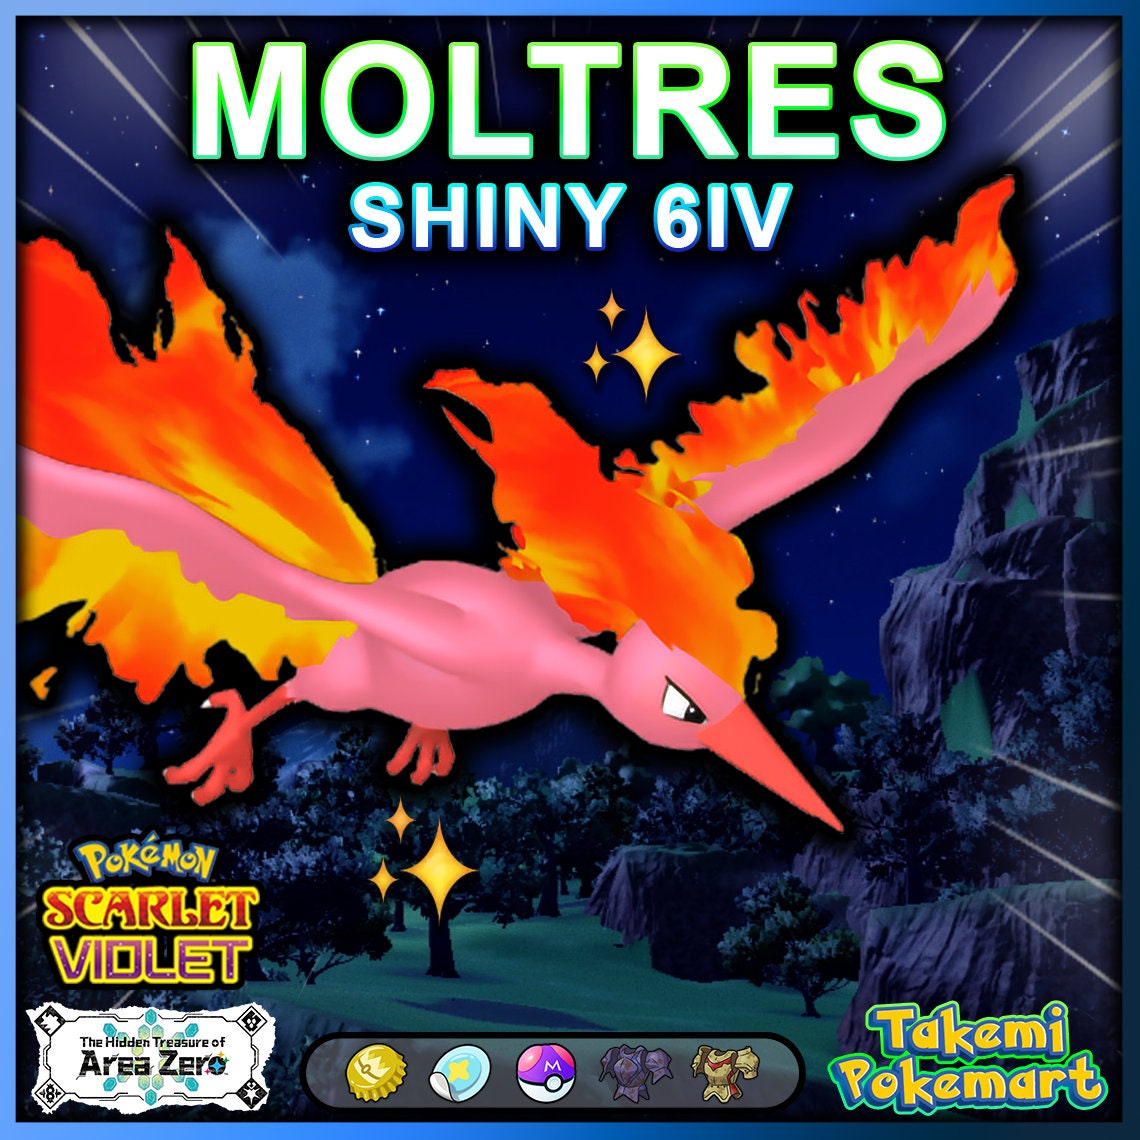 Shiny Galarian Moltres - 6IV - Weakness Policy - Pokemon Scarlet & Violet